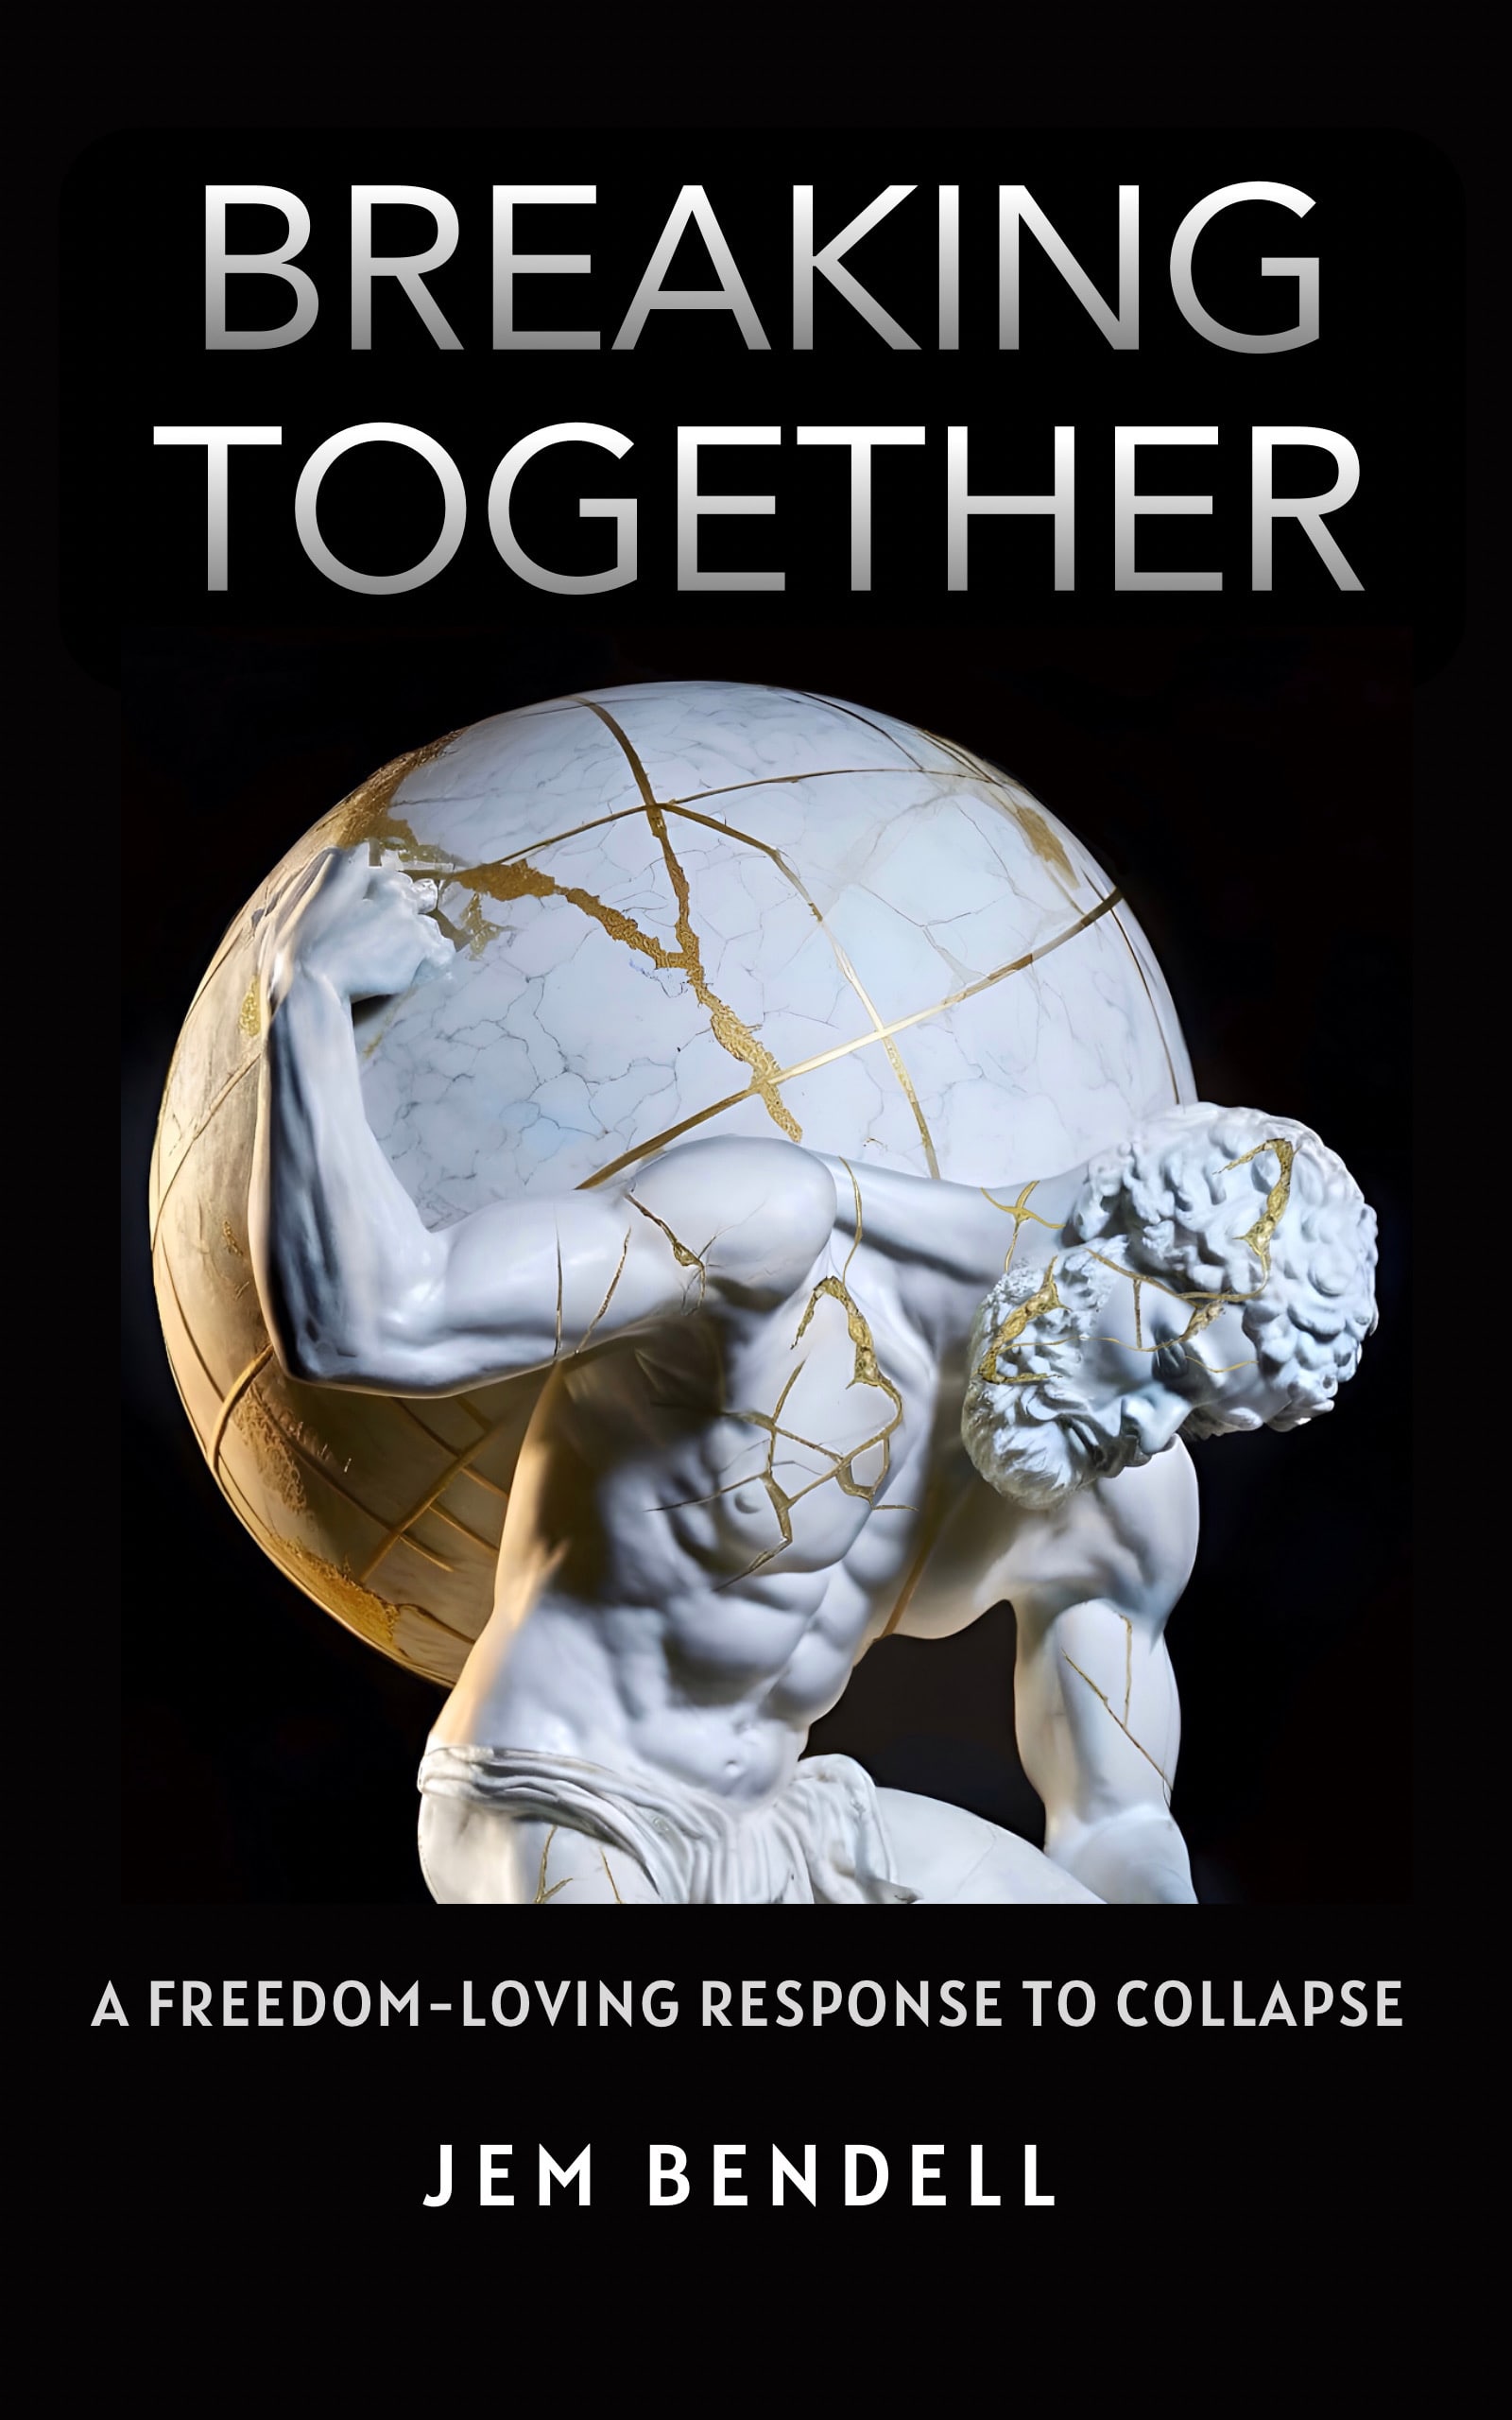 Breaking Together: Dialogue with Jem Bendell & Ralph Thurm